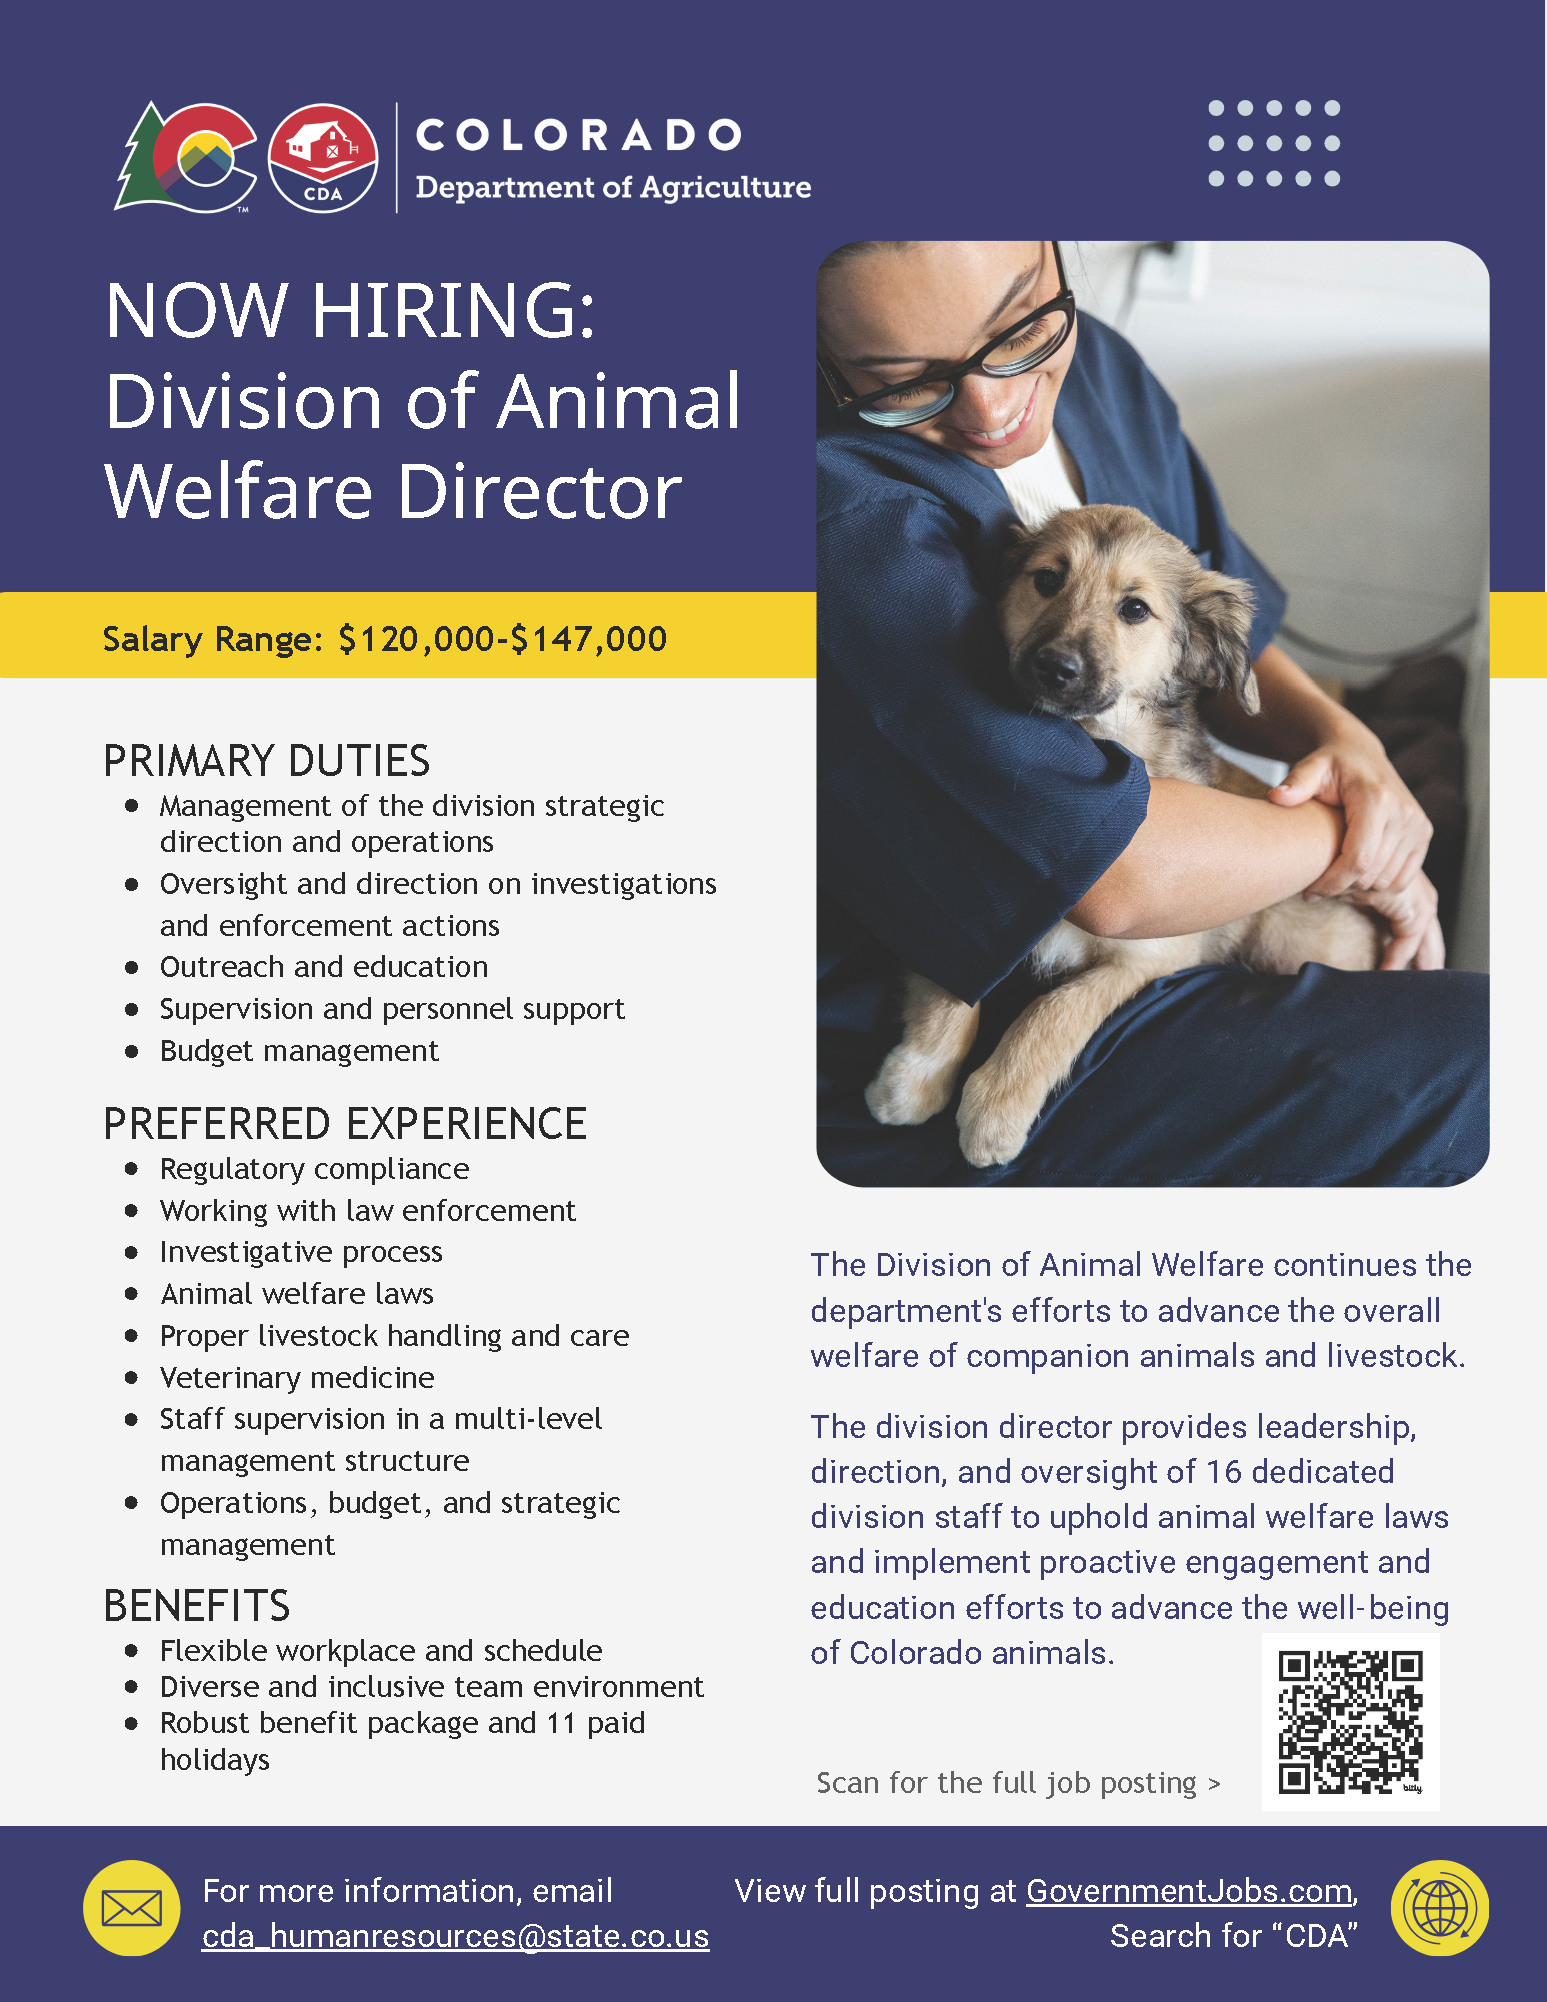 A woman holding a puppy on a flyer describing the primary duties, preferred experience and benefits of the DAW Director position